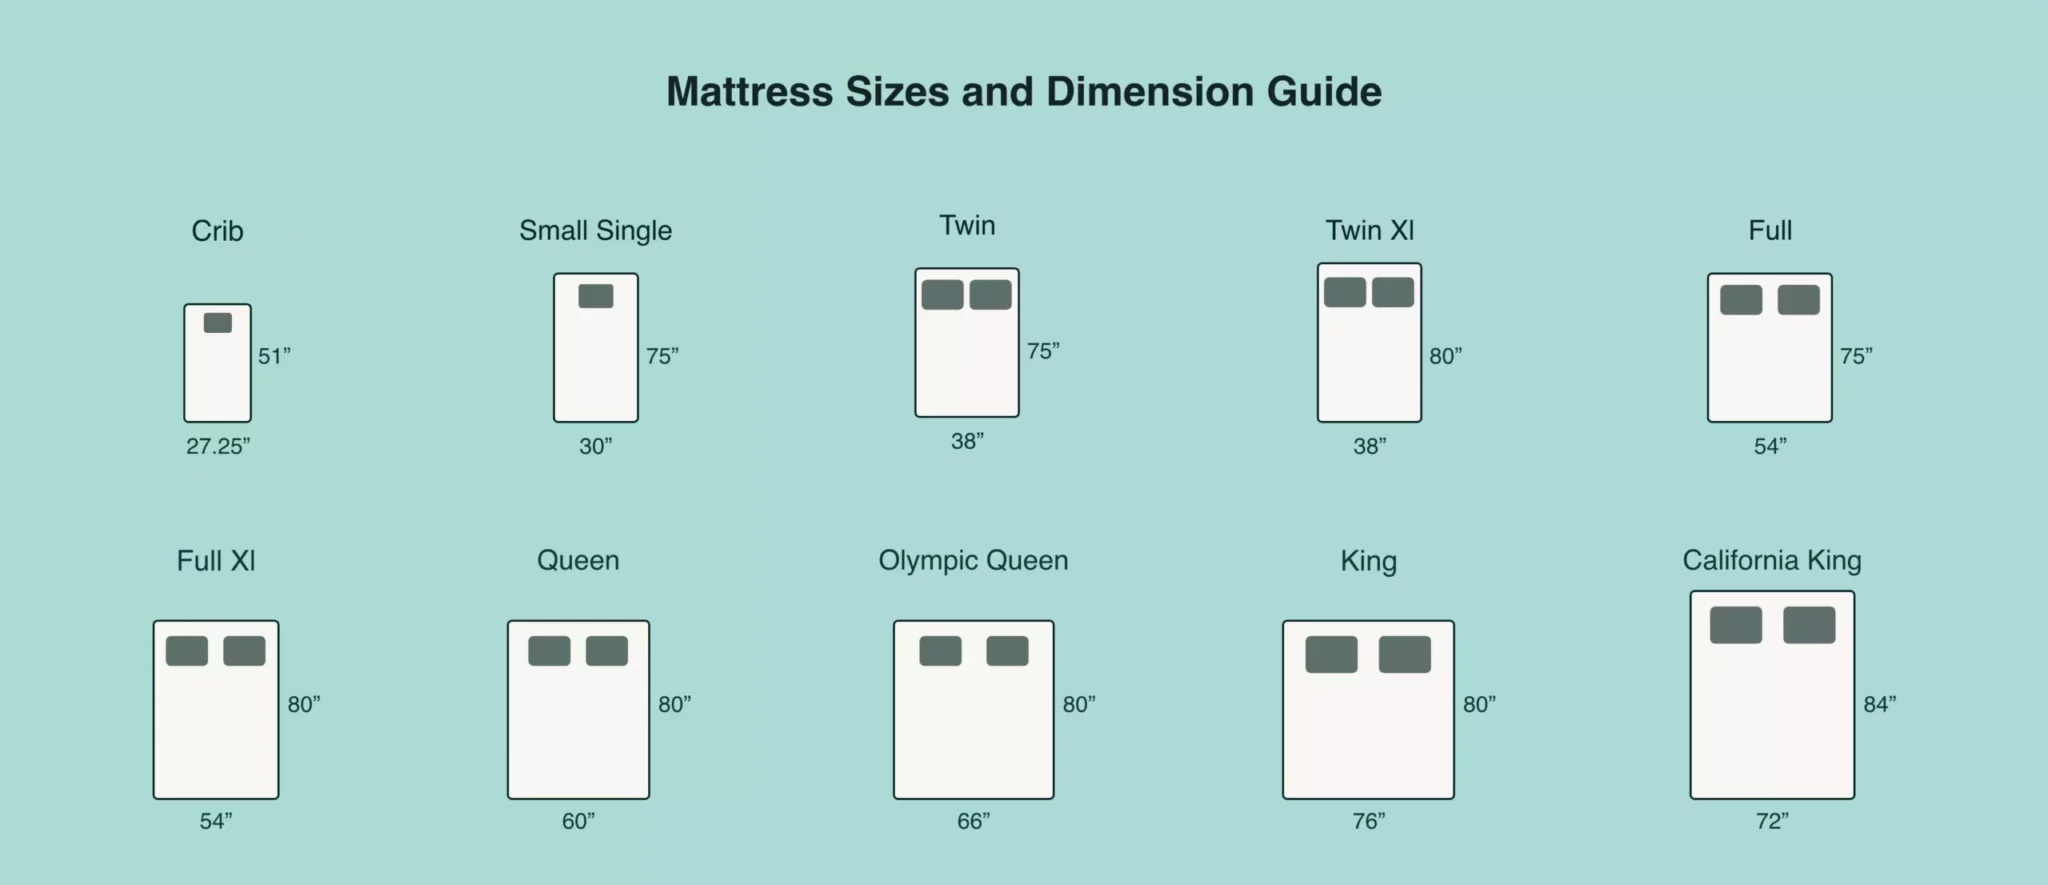 need dimensions for mattress sizes